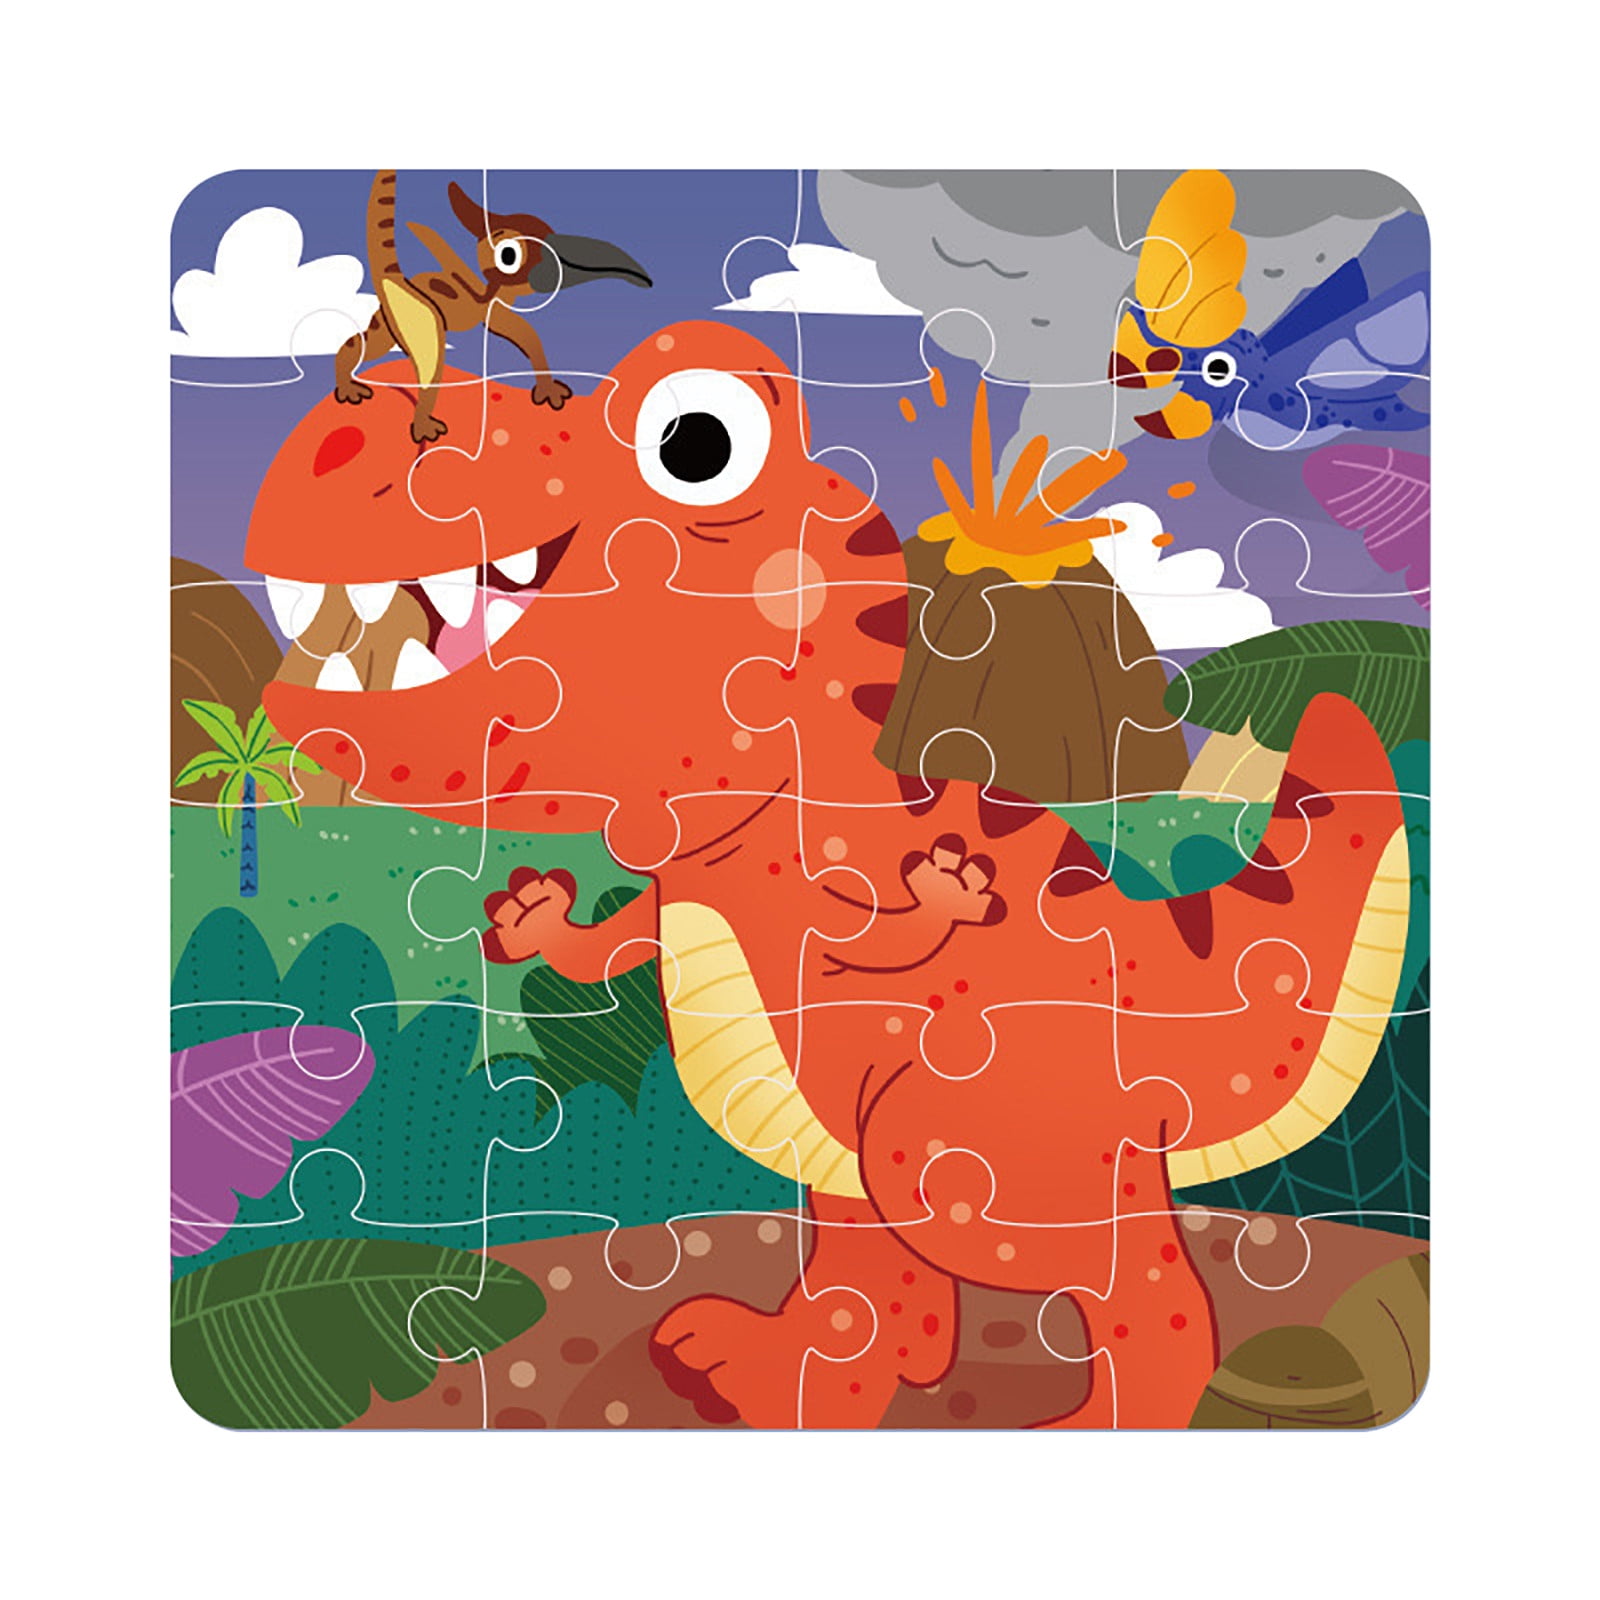 Wolfoo and Friends Wooden Kid Jigsaw Puzzle for Cartoon Fan Boys Girls: Buy  Online at Best Price in Egypt - Souq is now